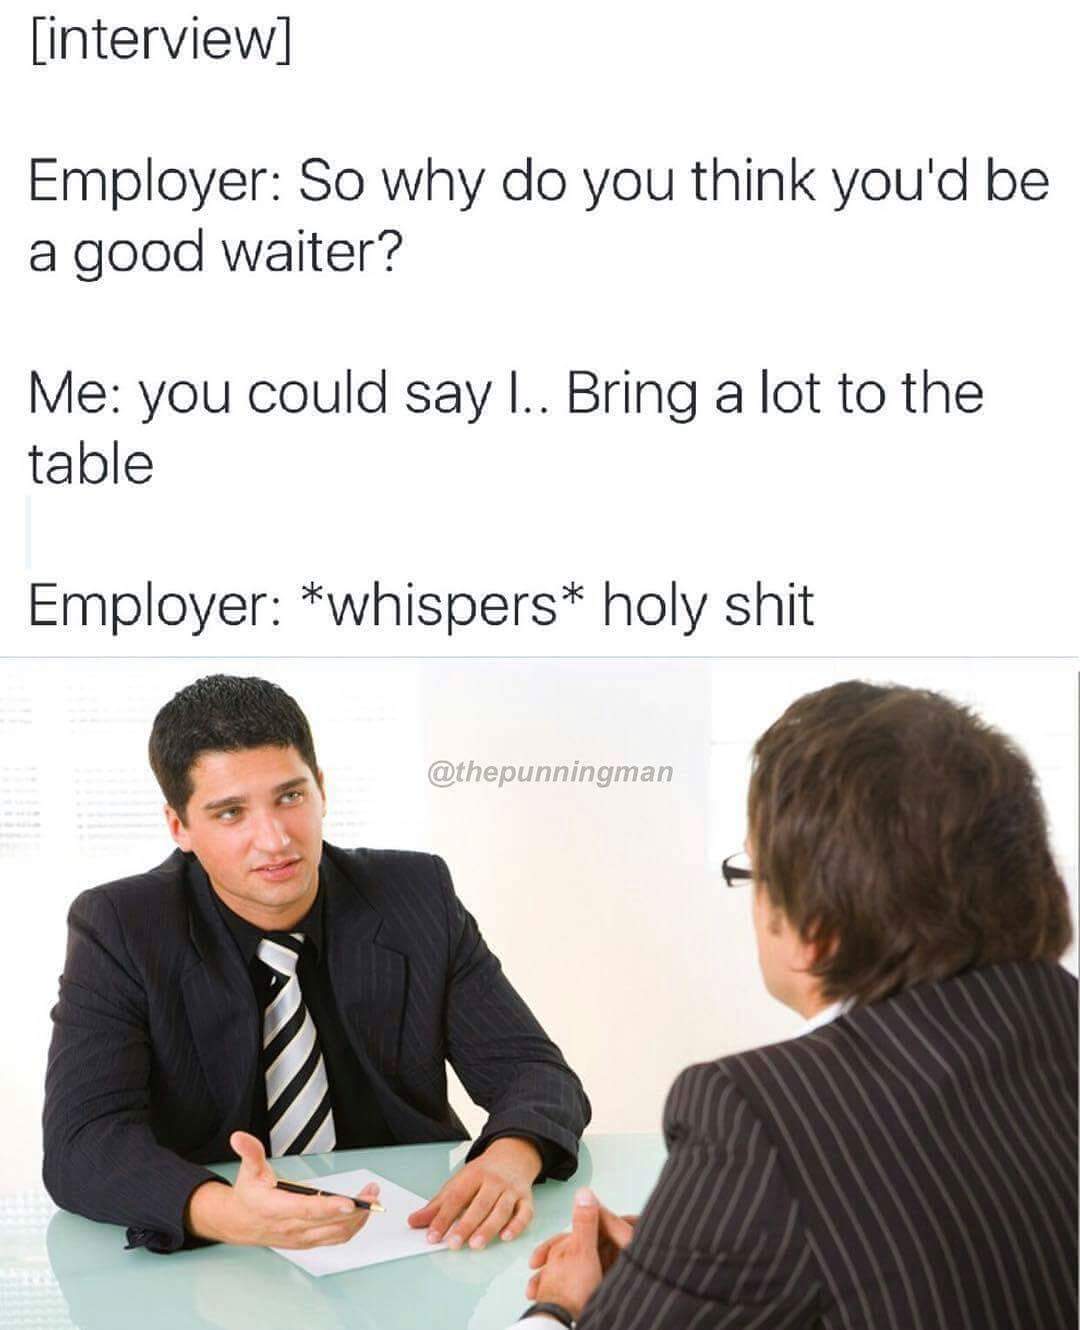 memes interview - interview Employer So why do you think you'd be a good waiter? Me you could say ... Bring a lot to the table Employer whispers holy shit